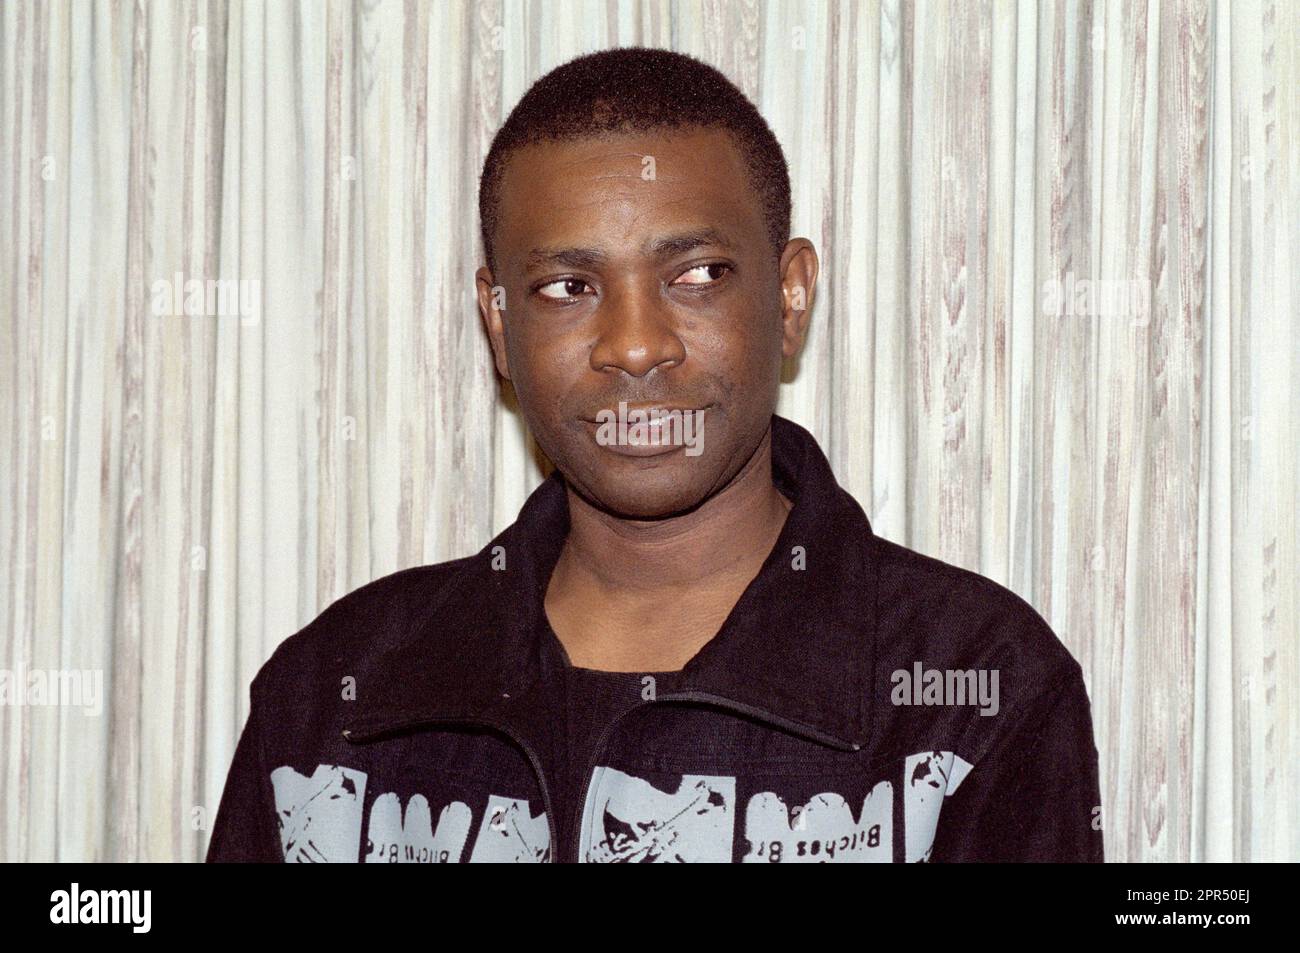 Italy Sanremo 2000-02-18: Youssou N'Dour during the photo session Stock Photo